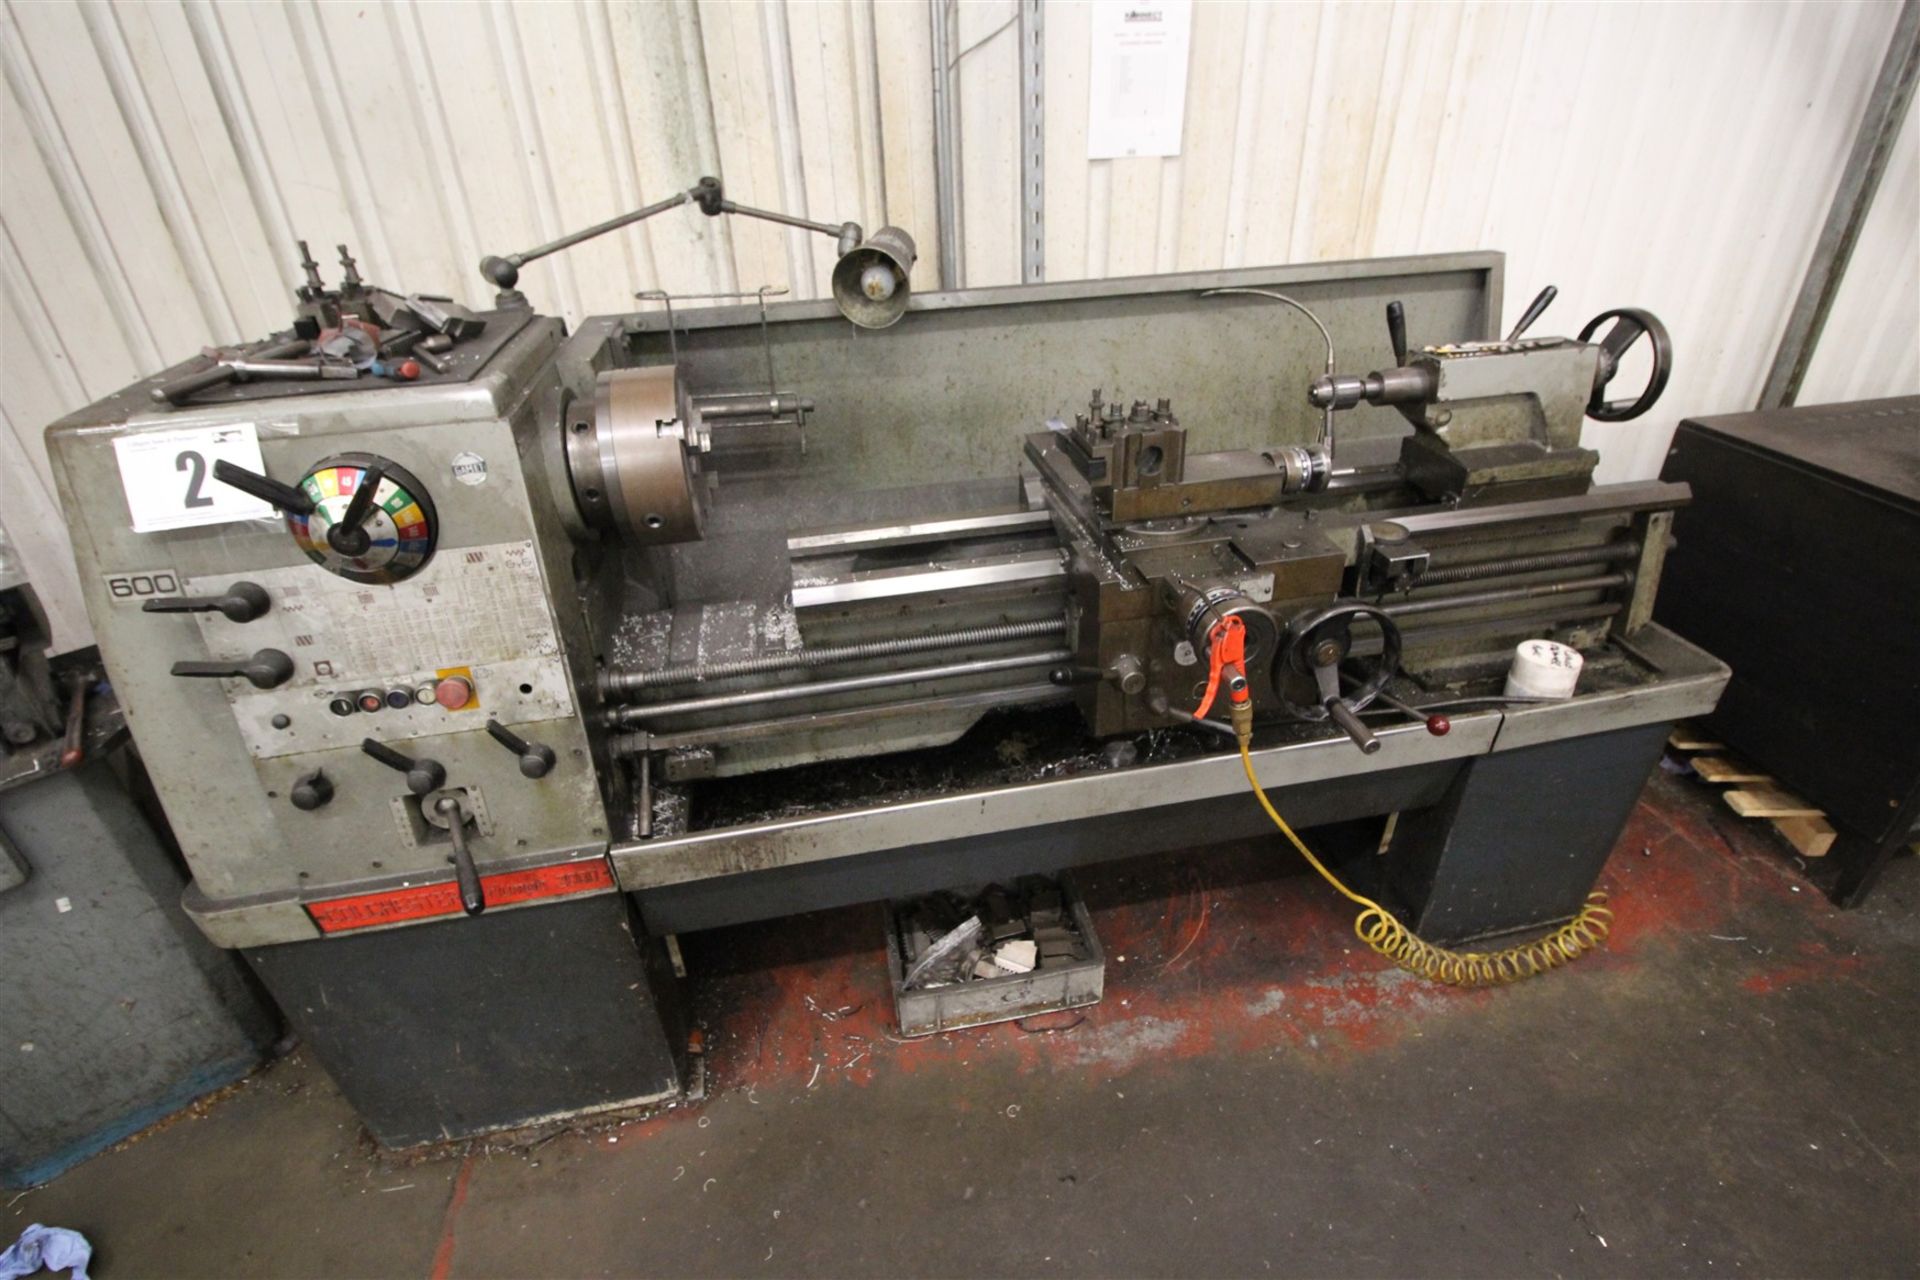 Colchester Triumph 2000 Centre Lathe, Complete with 3-Jaw Chuck, Tail Stock, Approximately 5' Bed